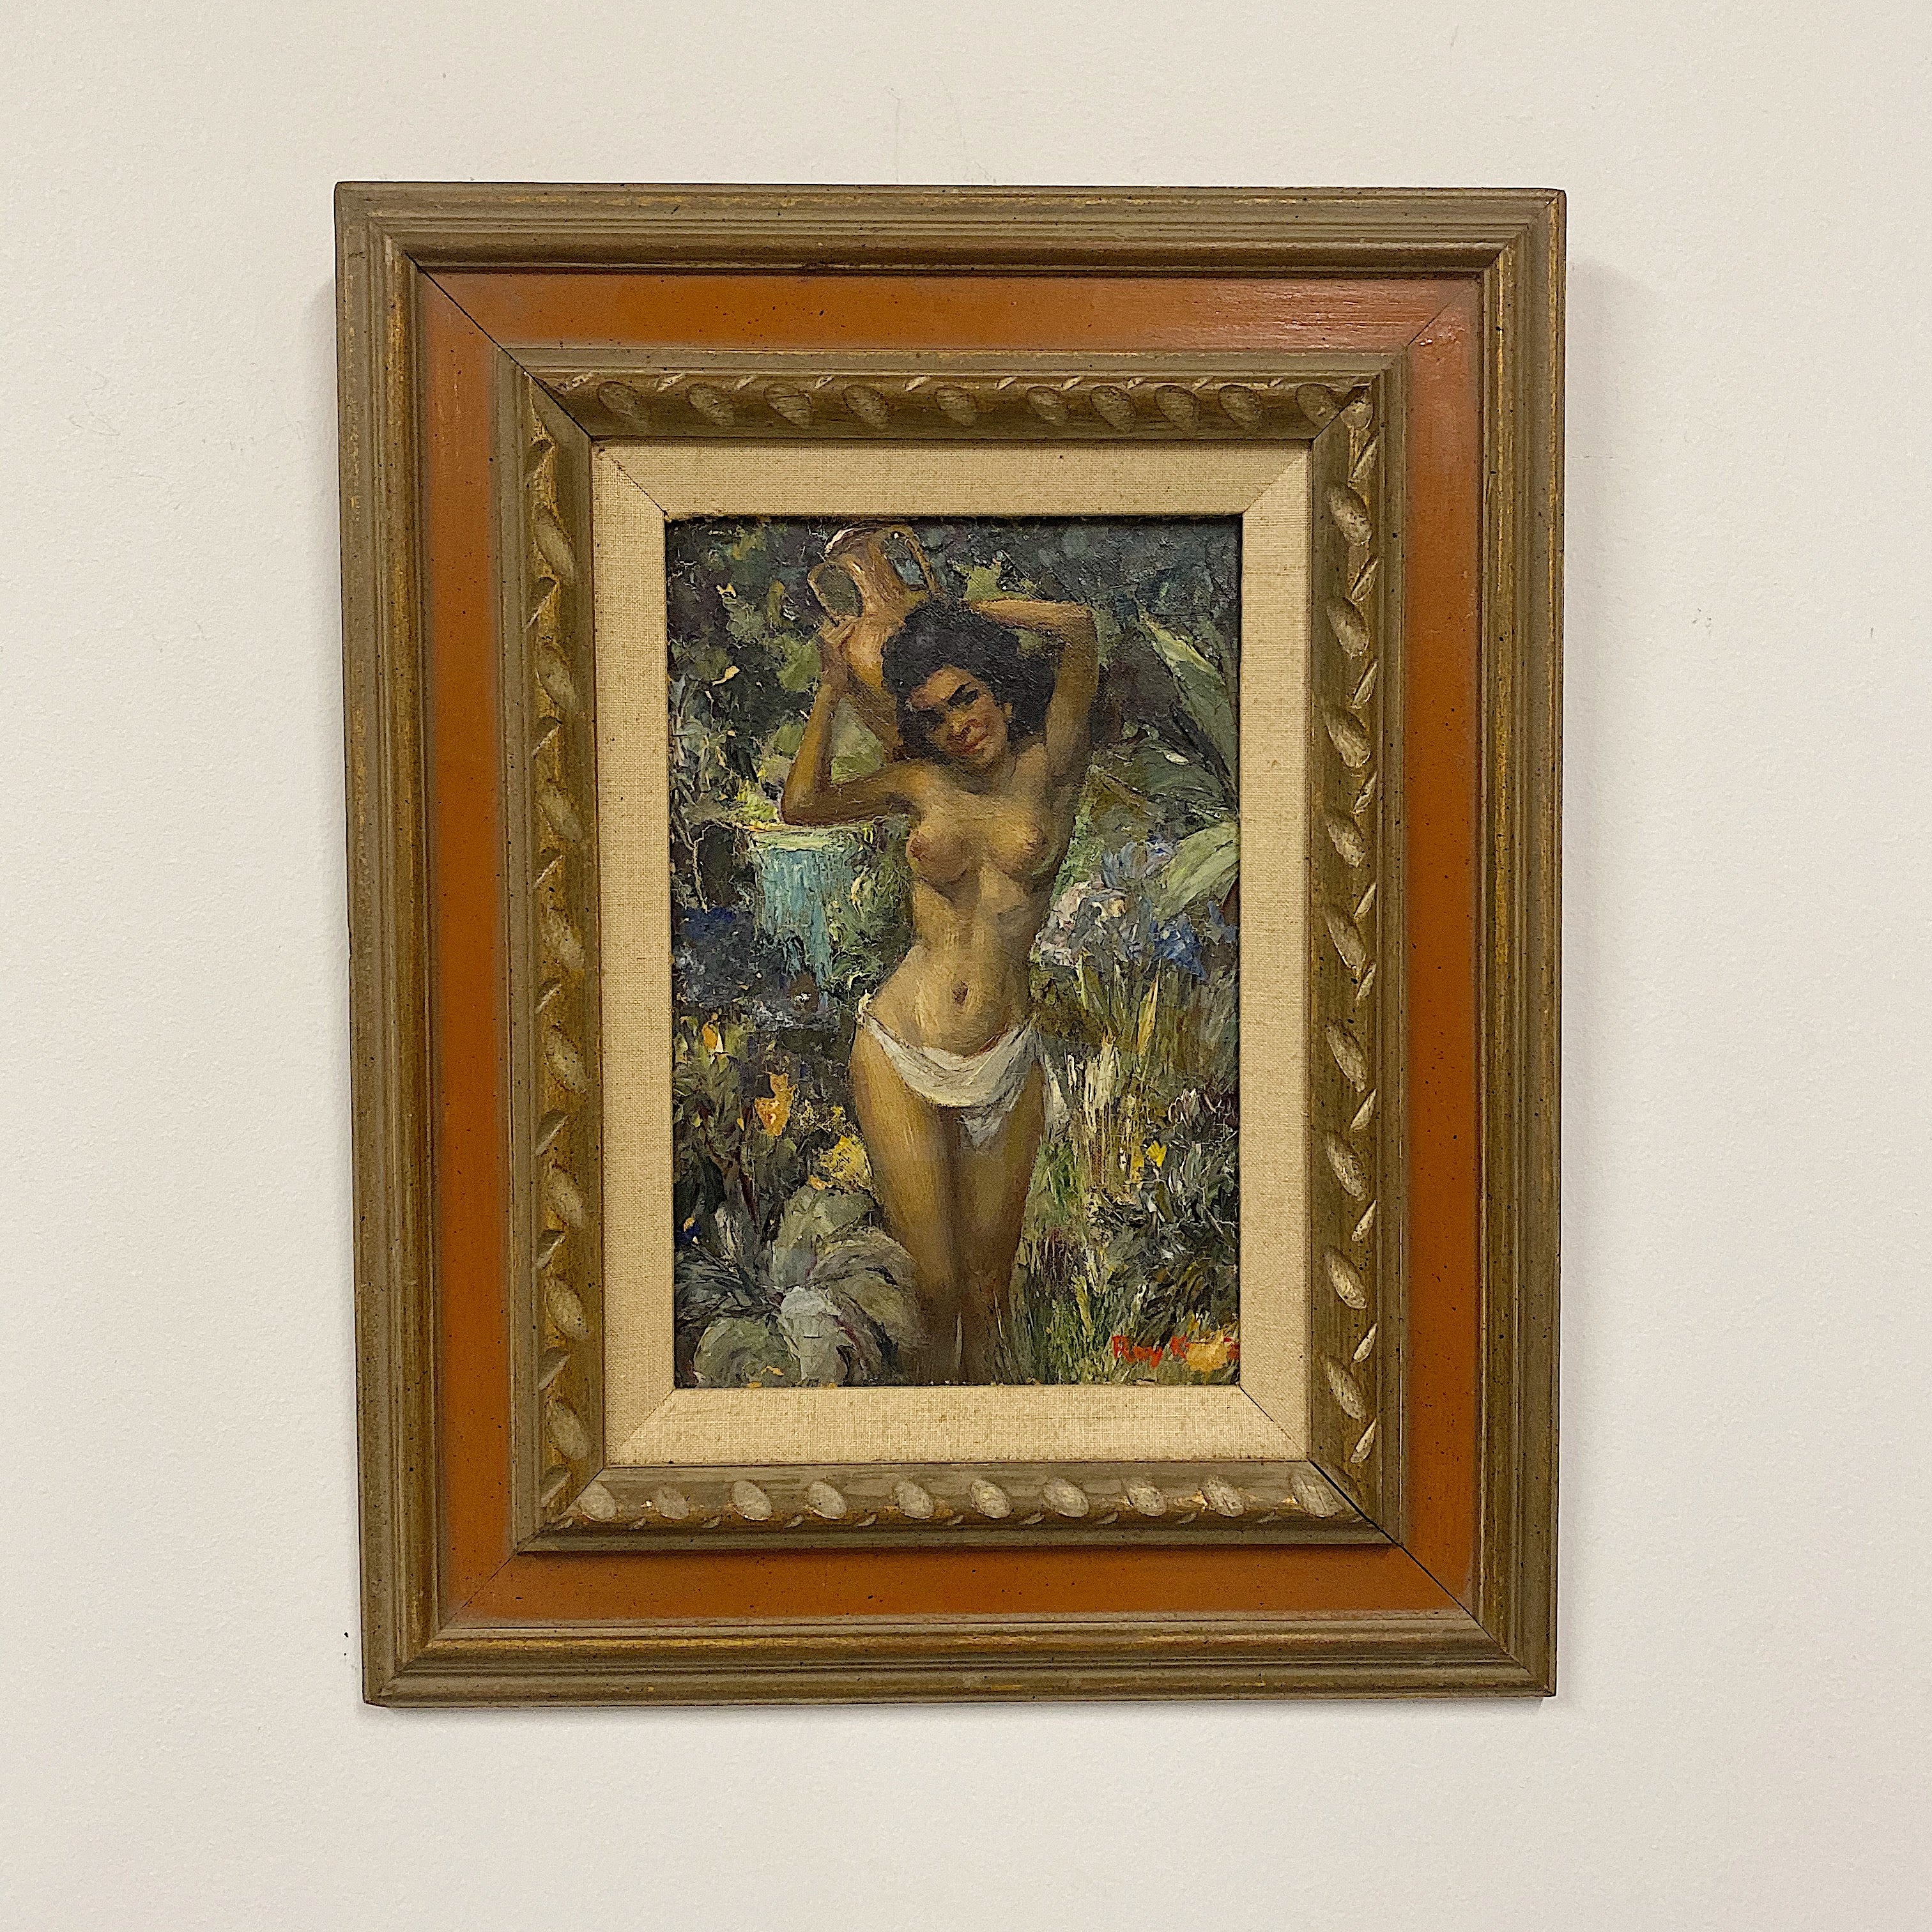 Roy Keister Nude Painting titled "Nina" - 1950s? - Signed by Listed Artist - Vintage Knife Paintings - Illustration Artist - AS IS Pinup